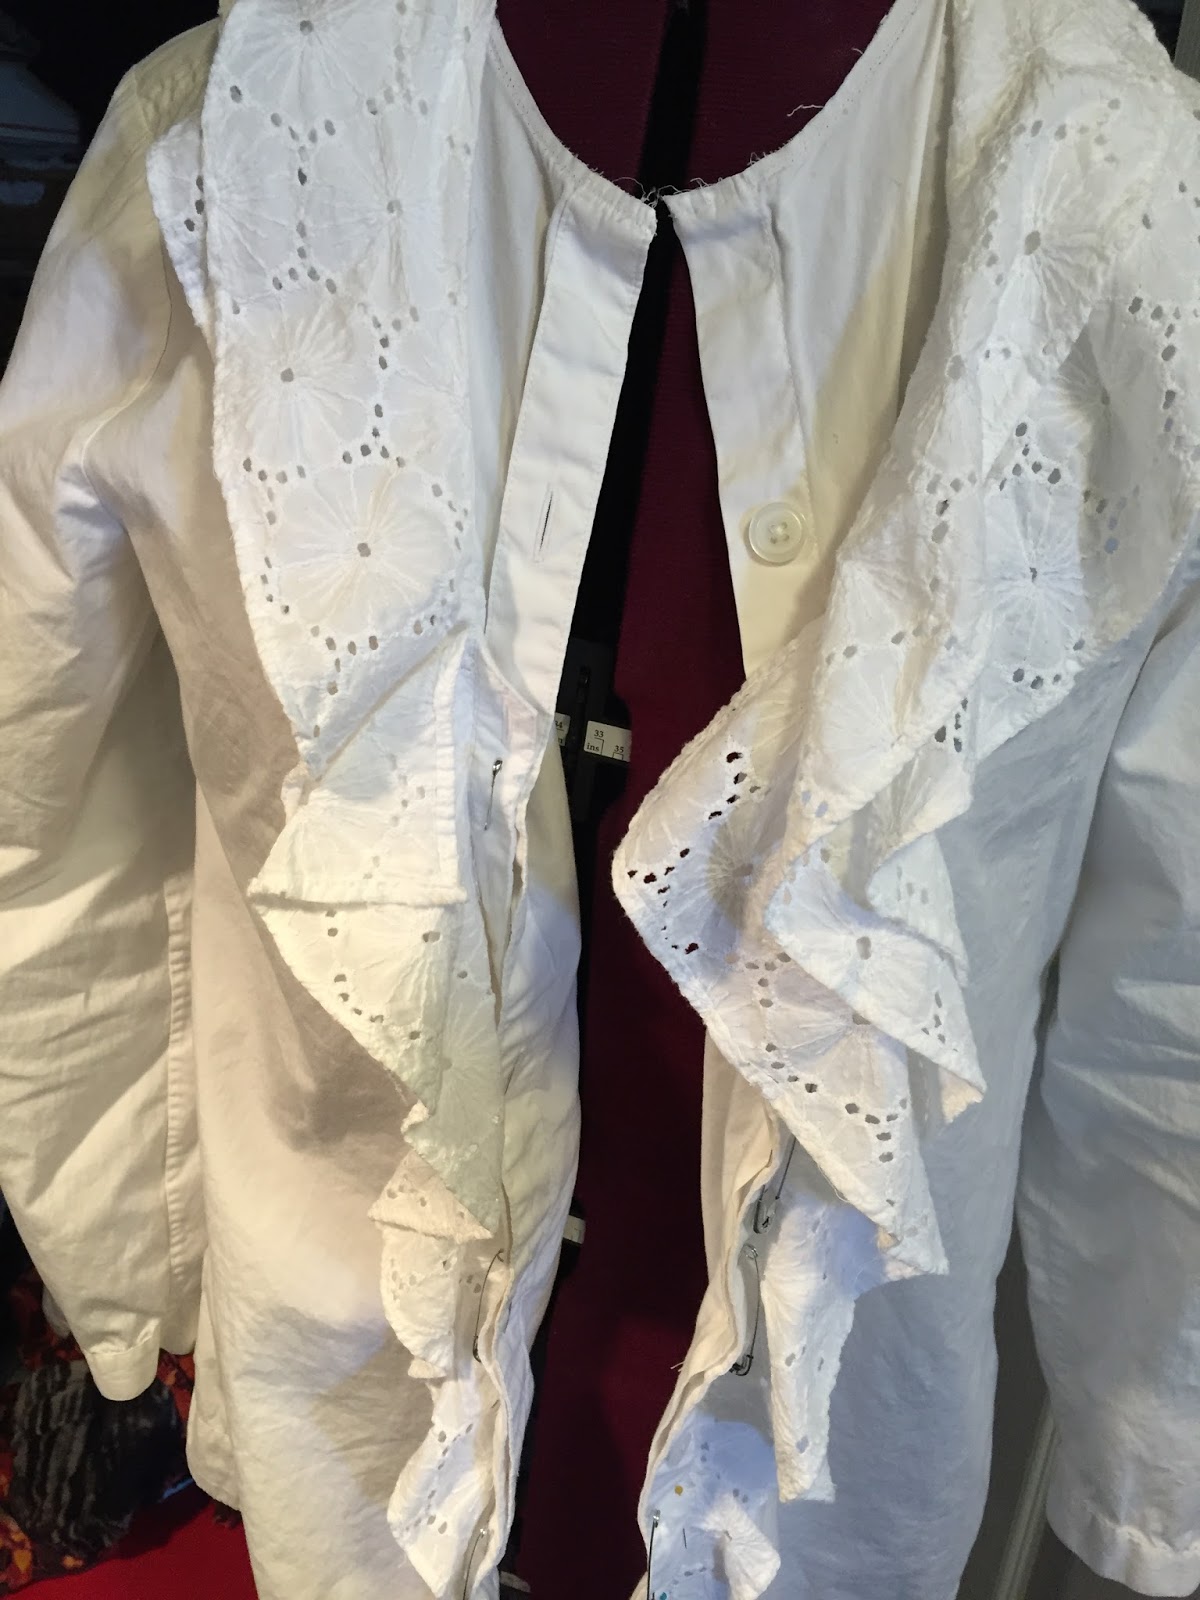 Refashioning a White Button Front Shirt with a Ruffled White Eyelet Collar